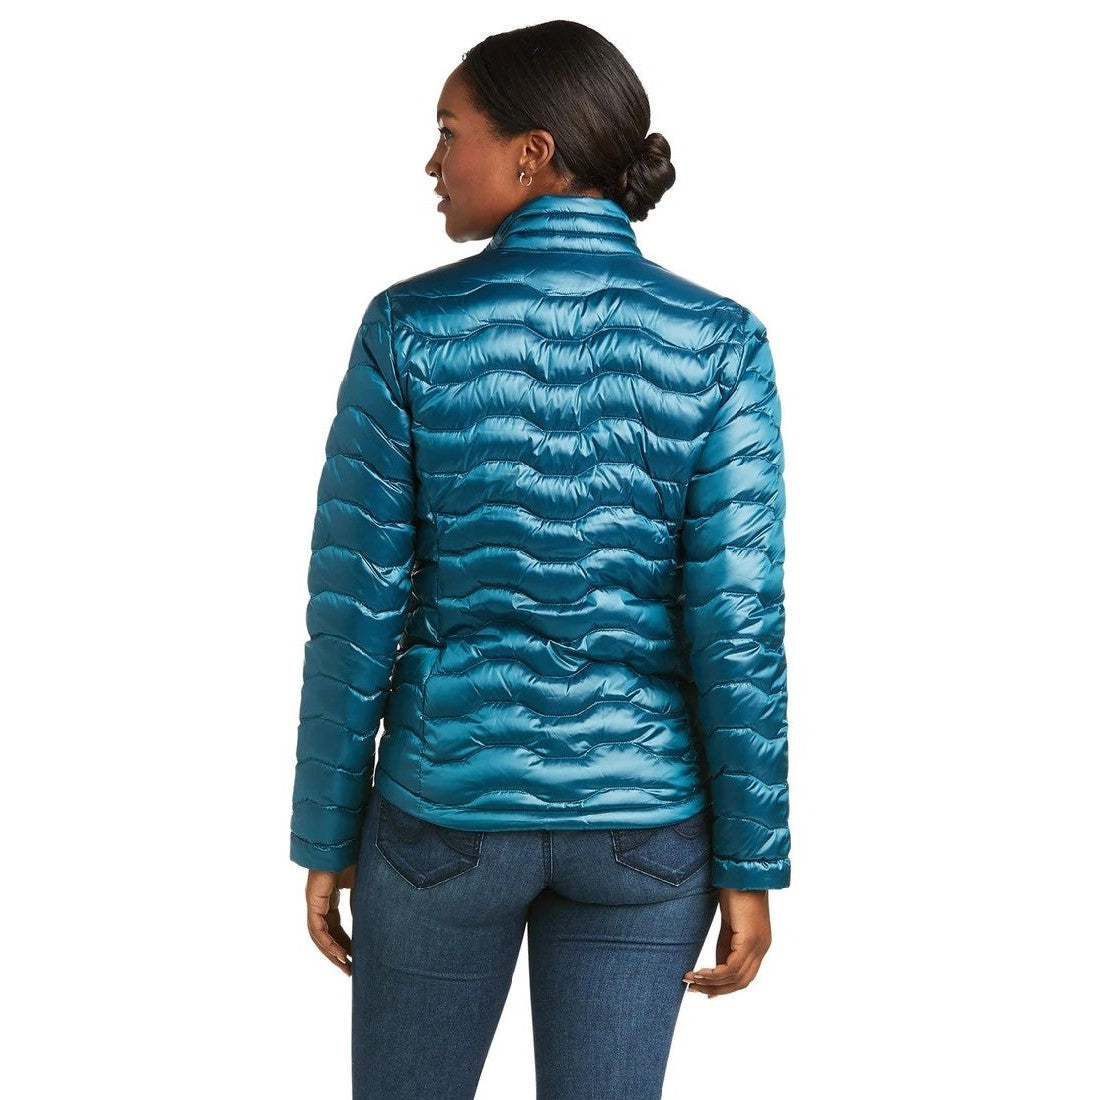 Ariat Z Nt Jacket Ideal 3.0 Down W22 Iridescent Eurasian Teal Ladies-Ascot Saddlery-The Equestrian